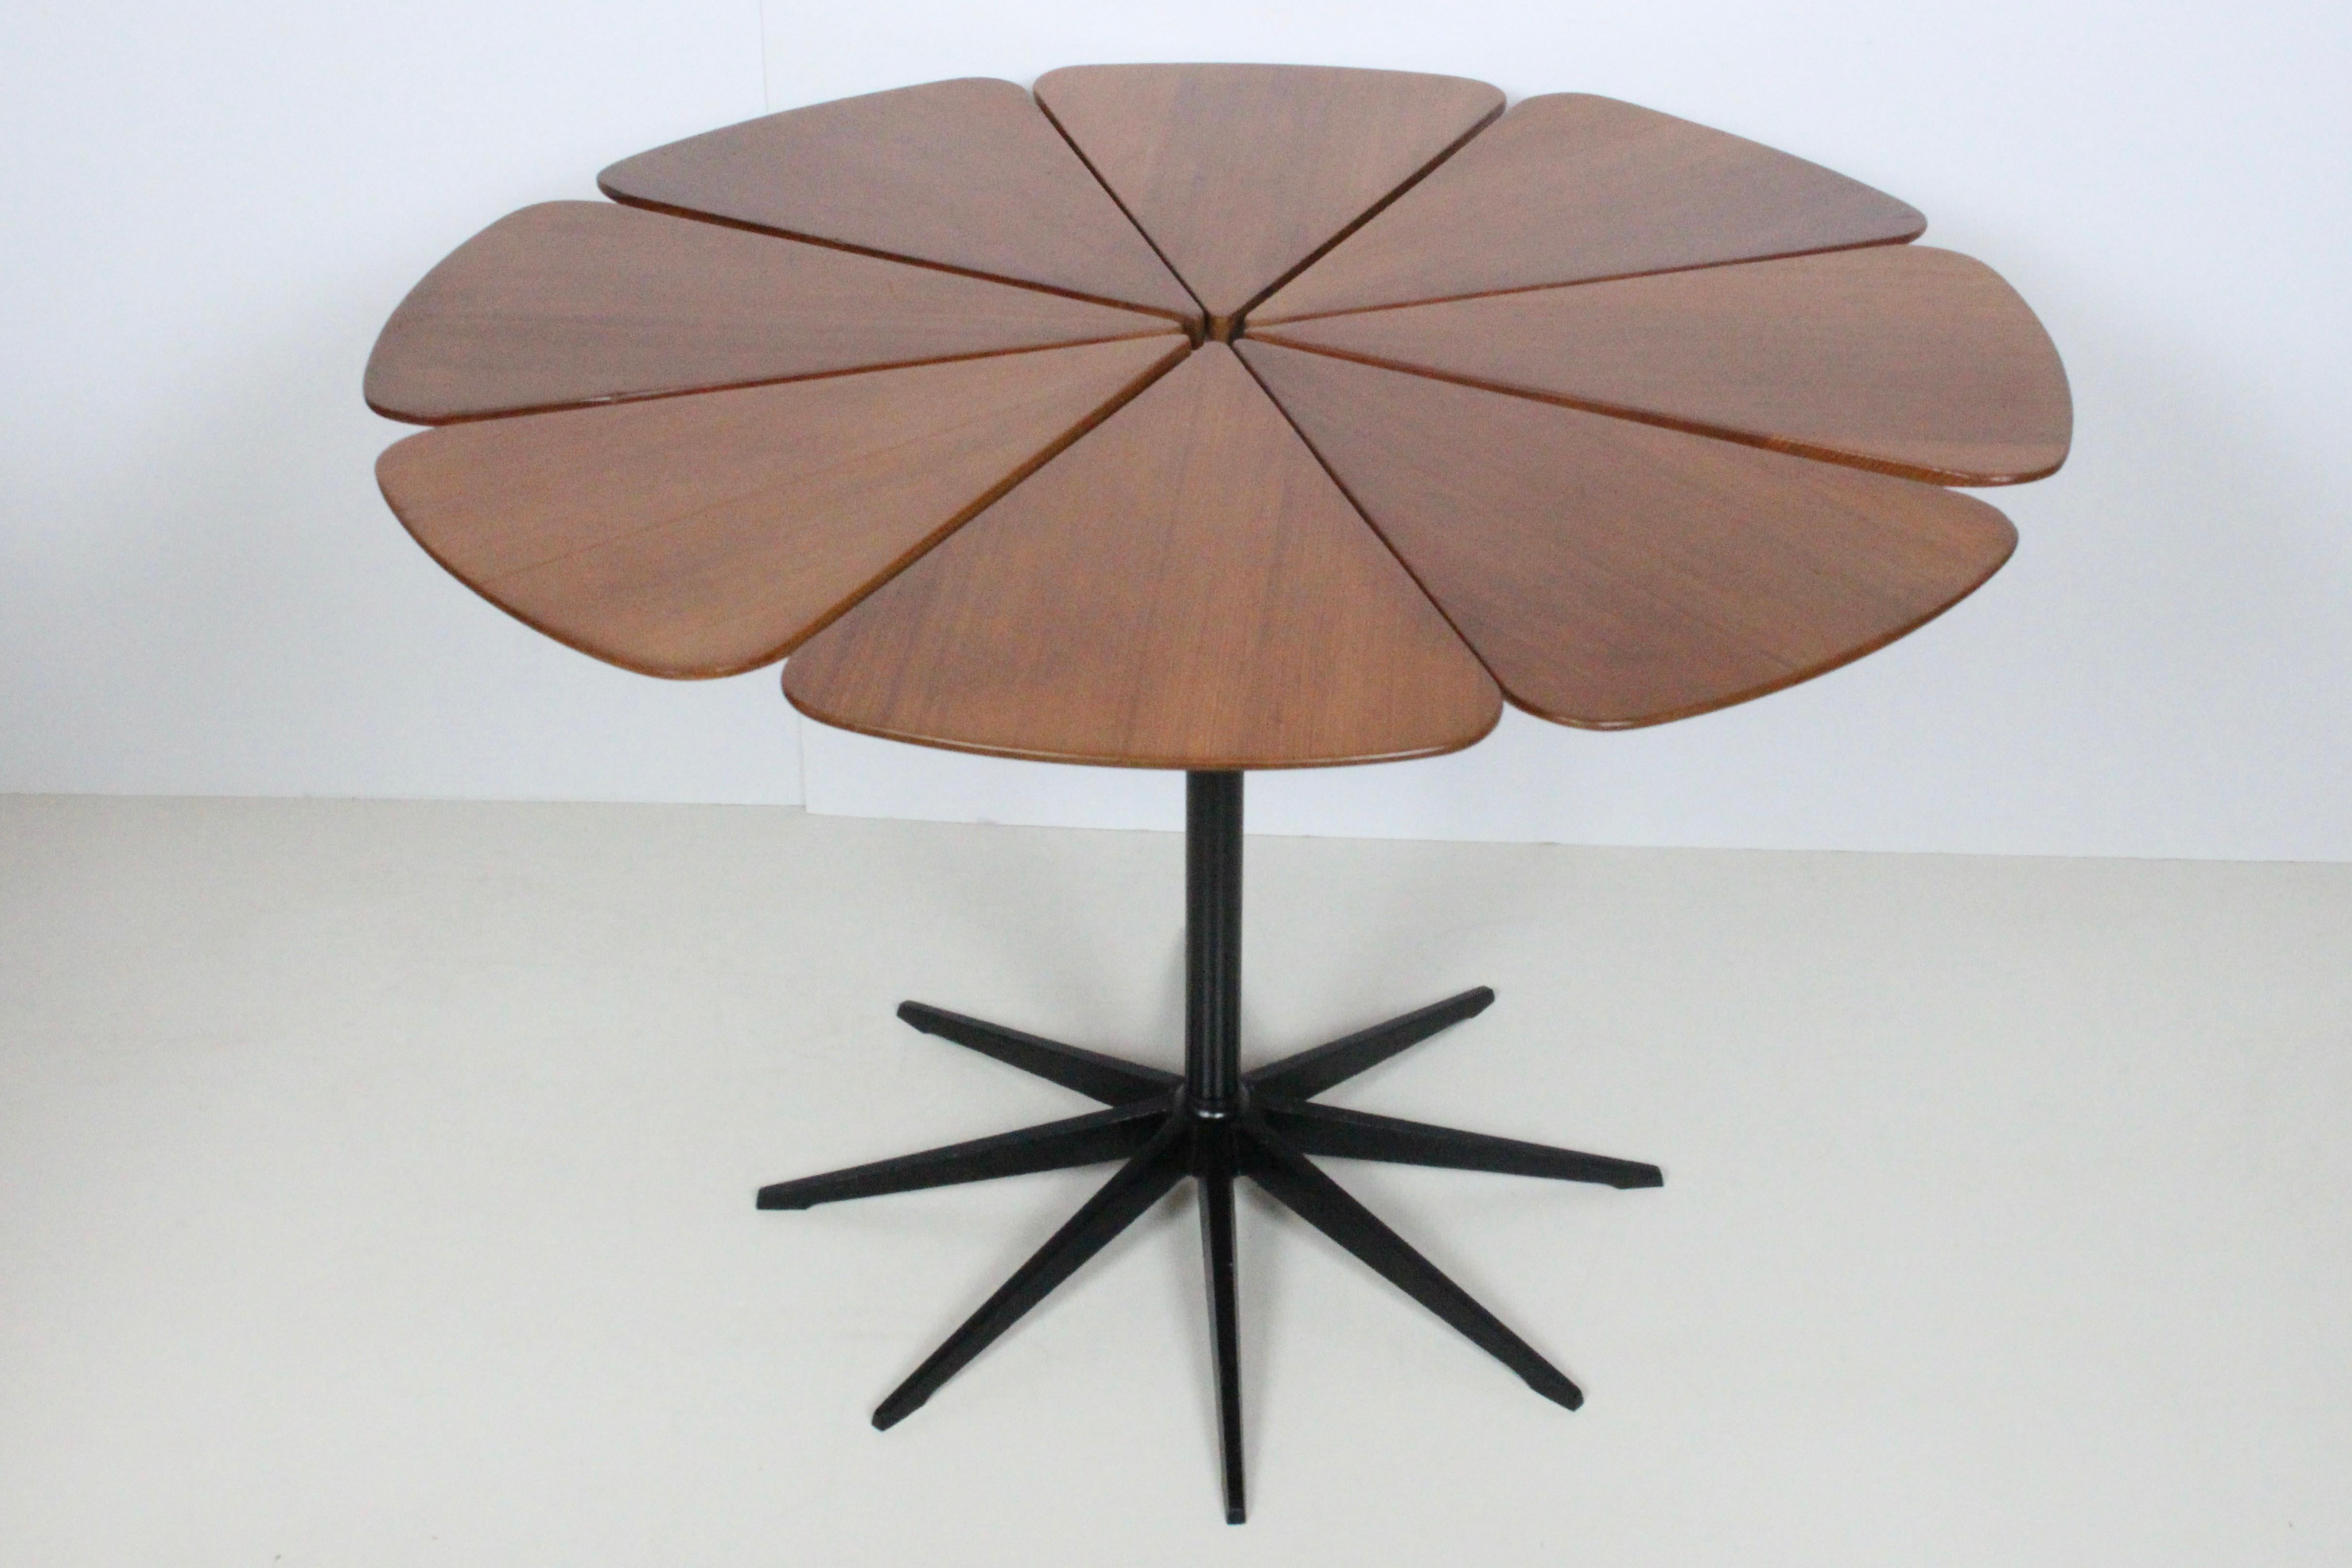 American Richard Schultz Petal Dining Table in Red Cedar with Black Enamel Base, 1960's For Sale